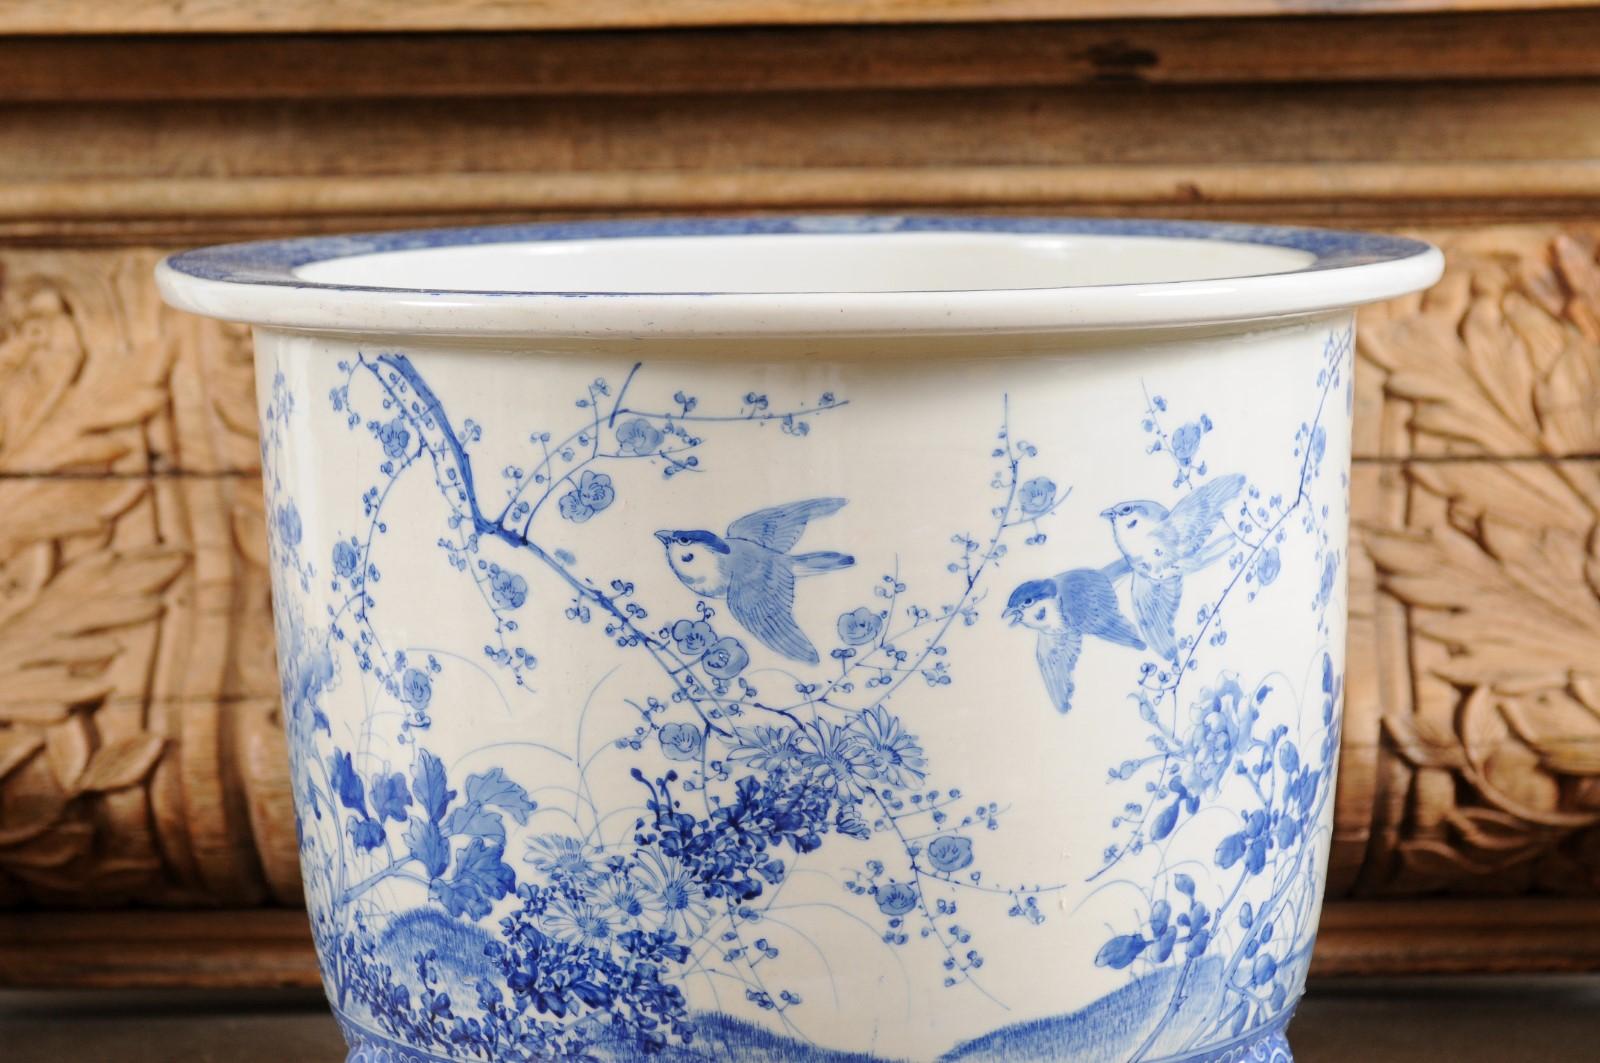 Porcelain Chinese Late 19th Century Blue and White Planter with Herons, Birds and Flowers